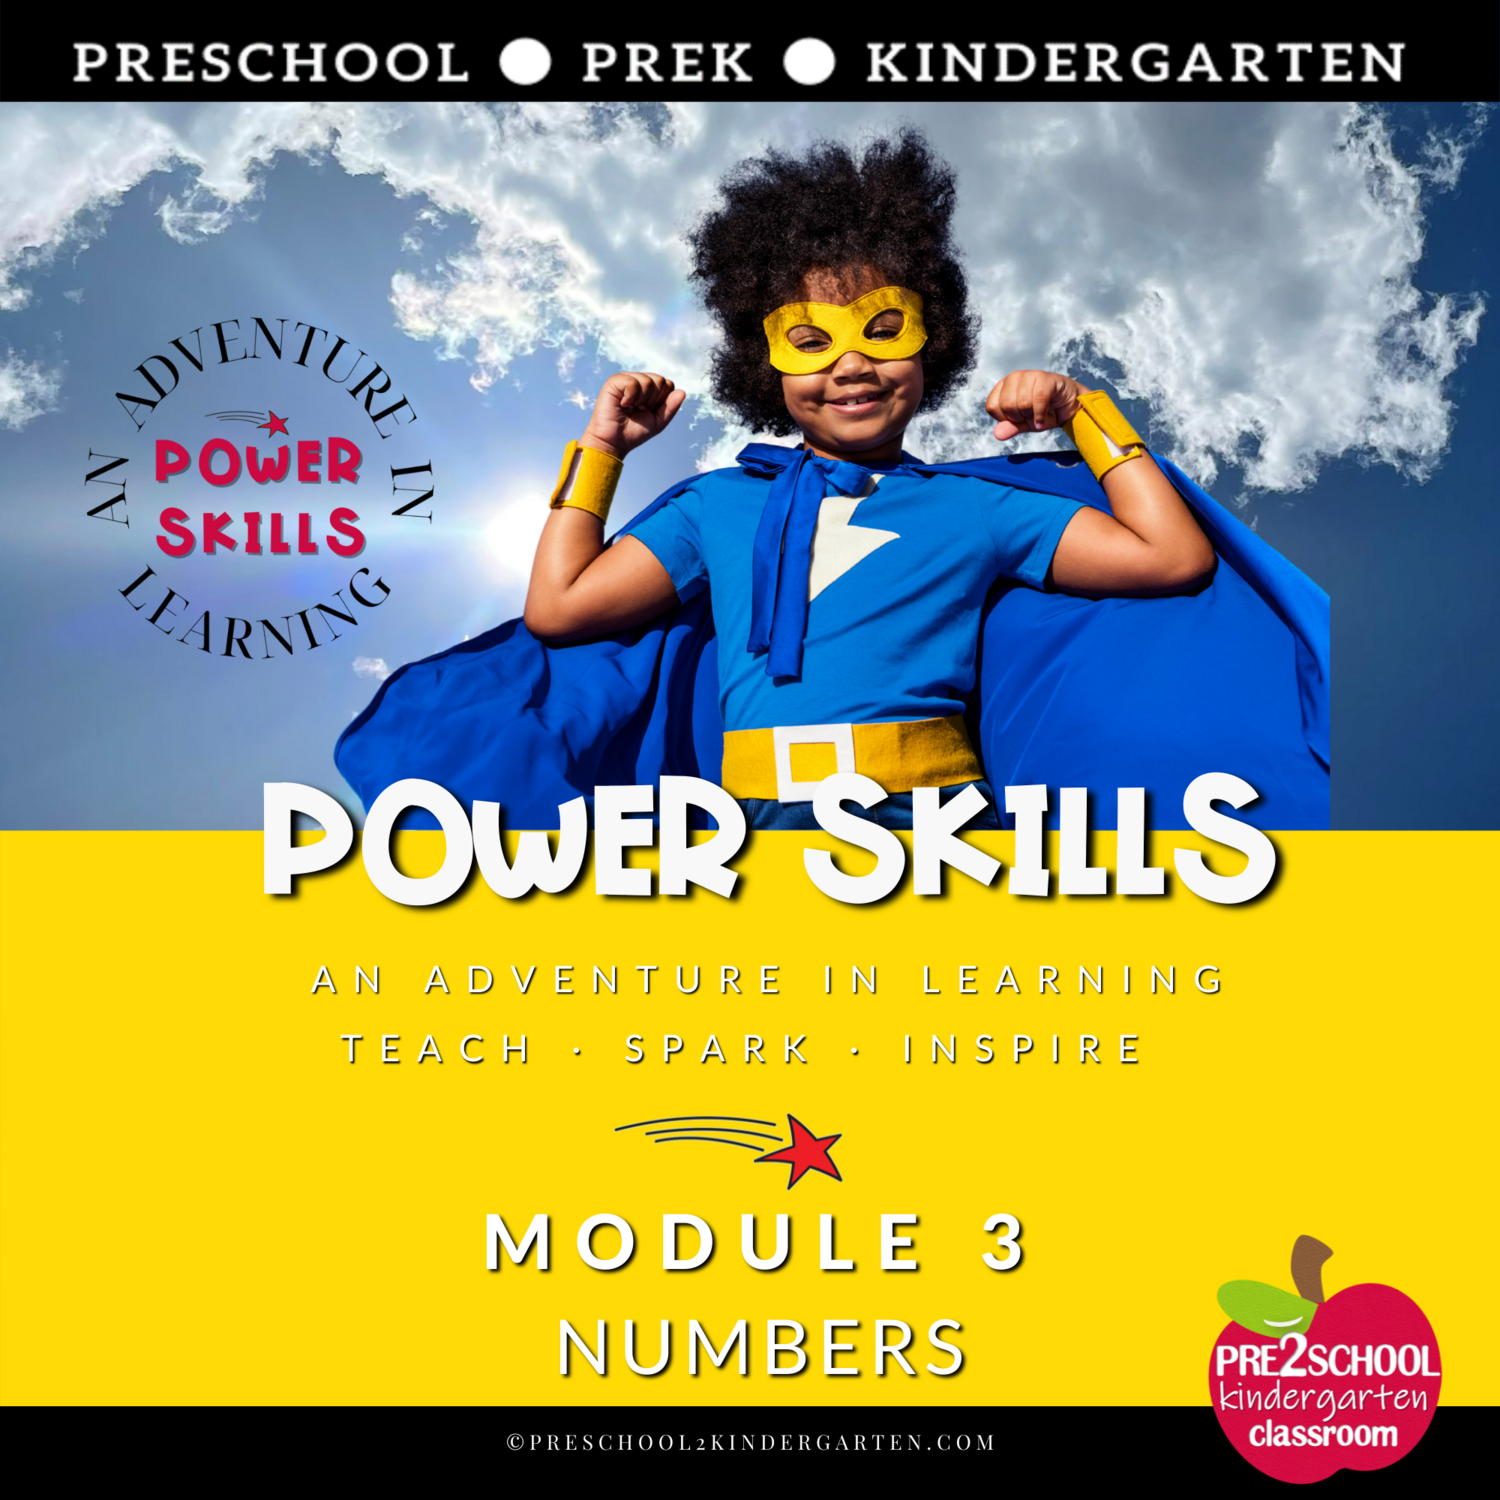 POWER SKILLS MODULE 3 – NUMBER COUNTING SKILLS